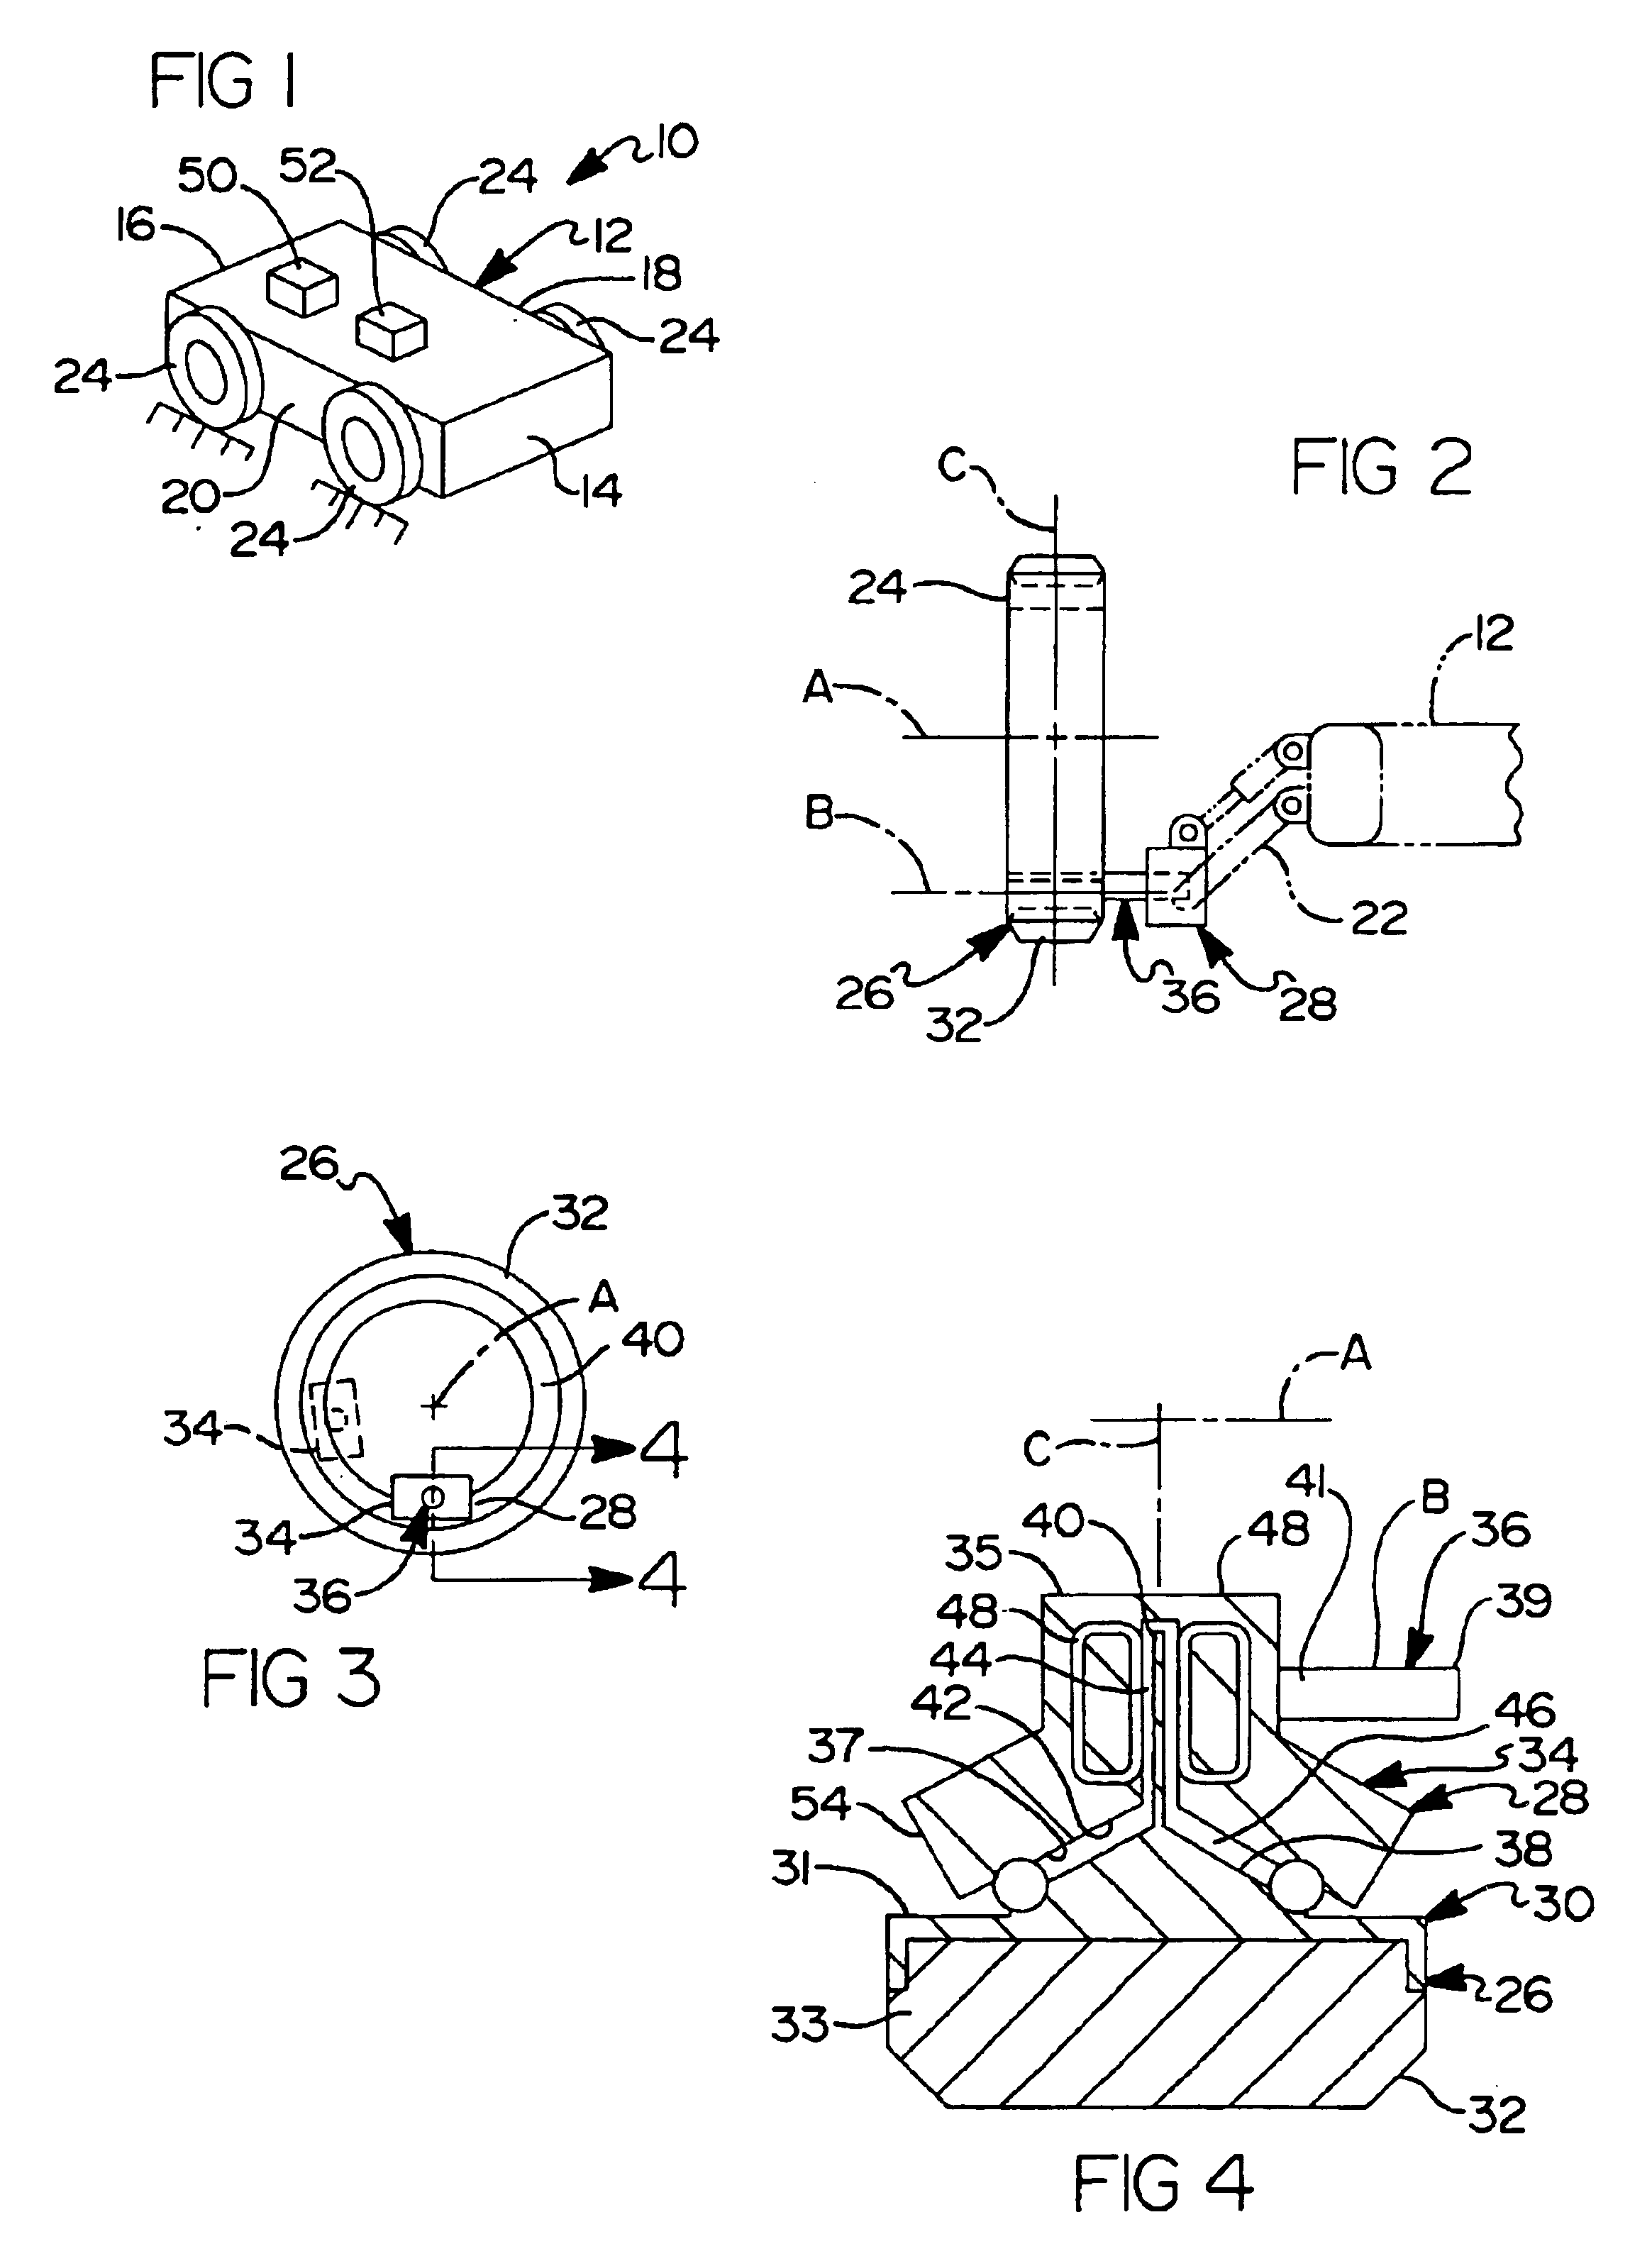 Motor in wheel electric drive system